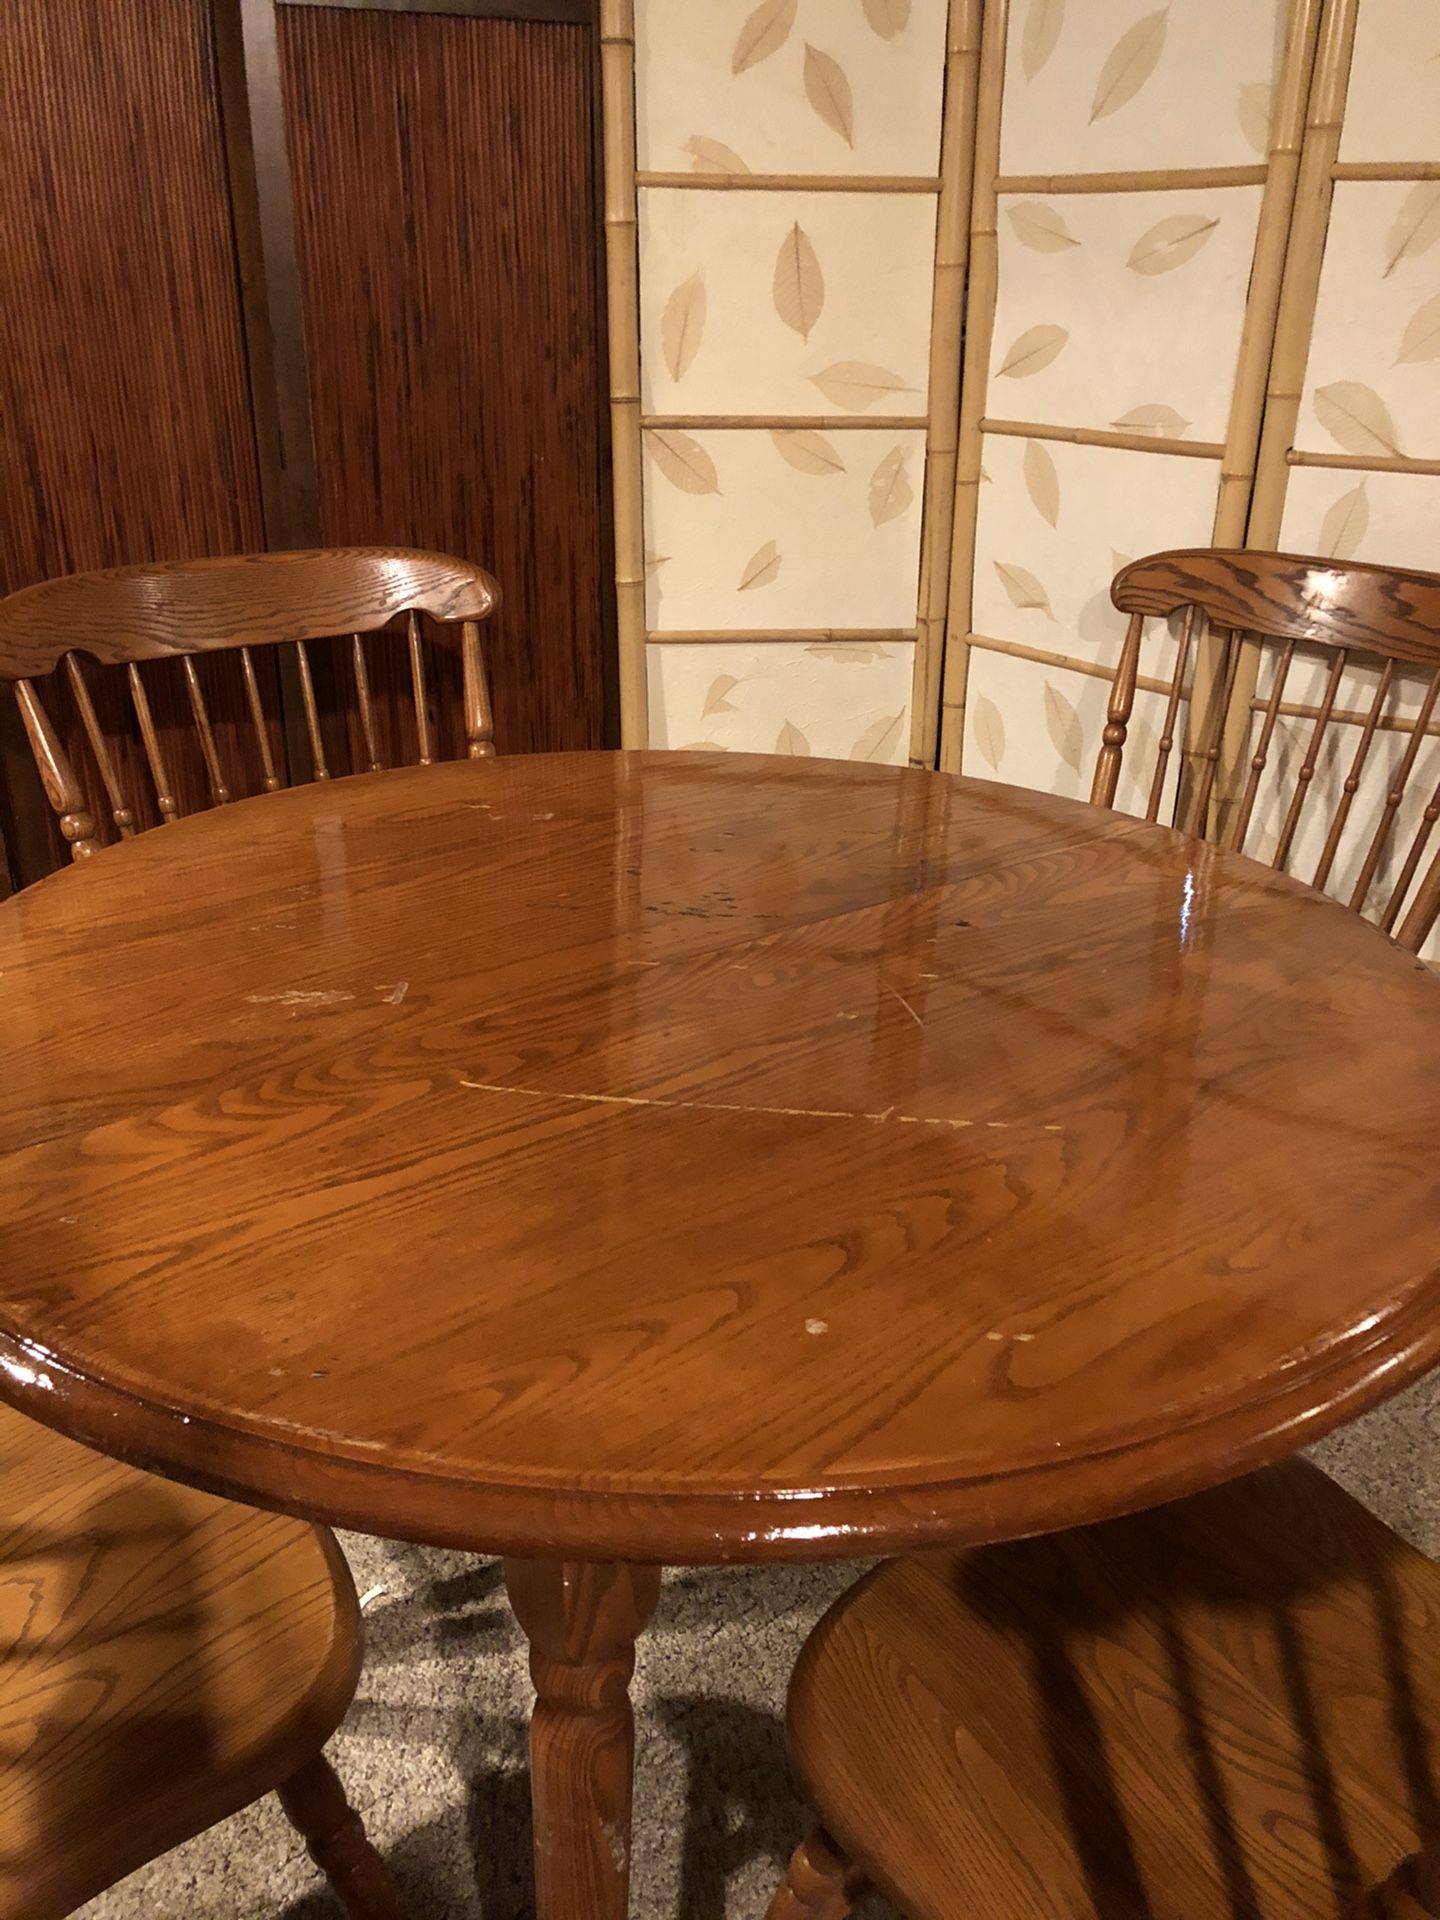 Table set with extension & 4 chairs.